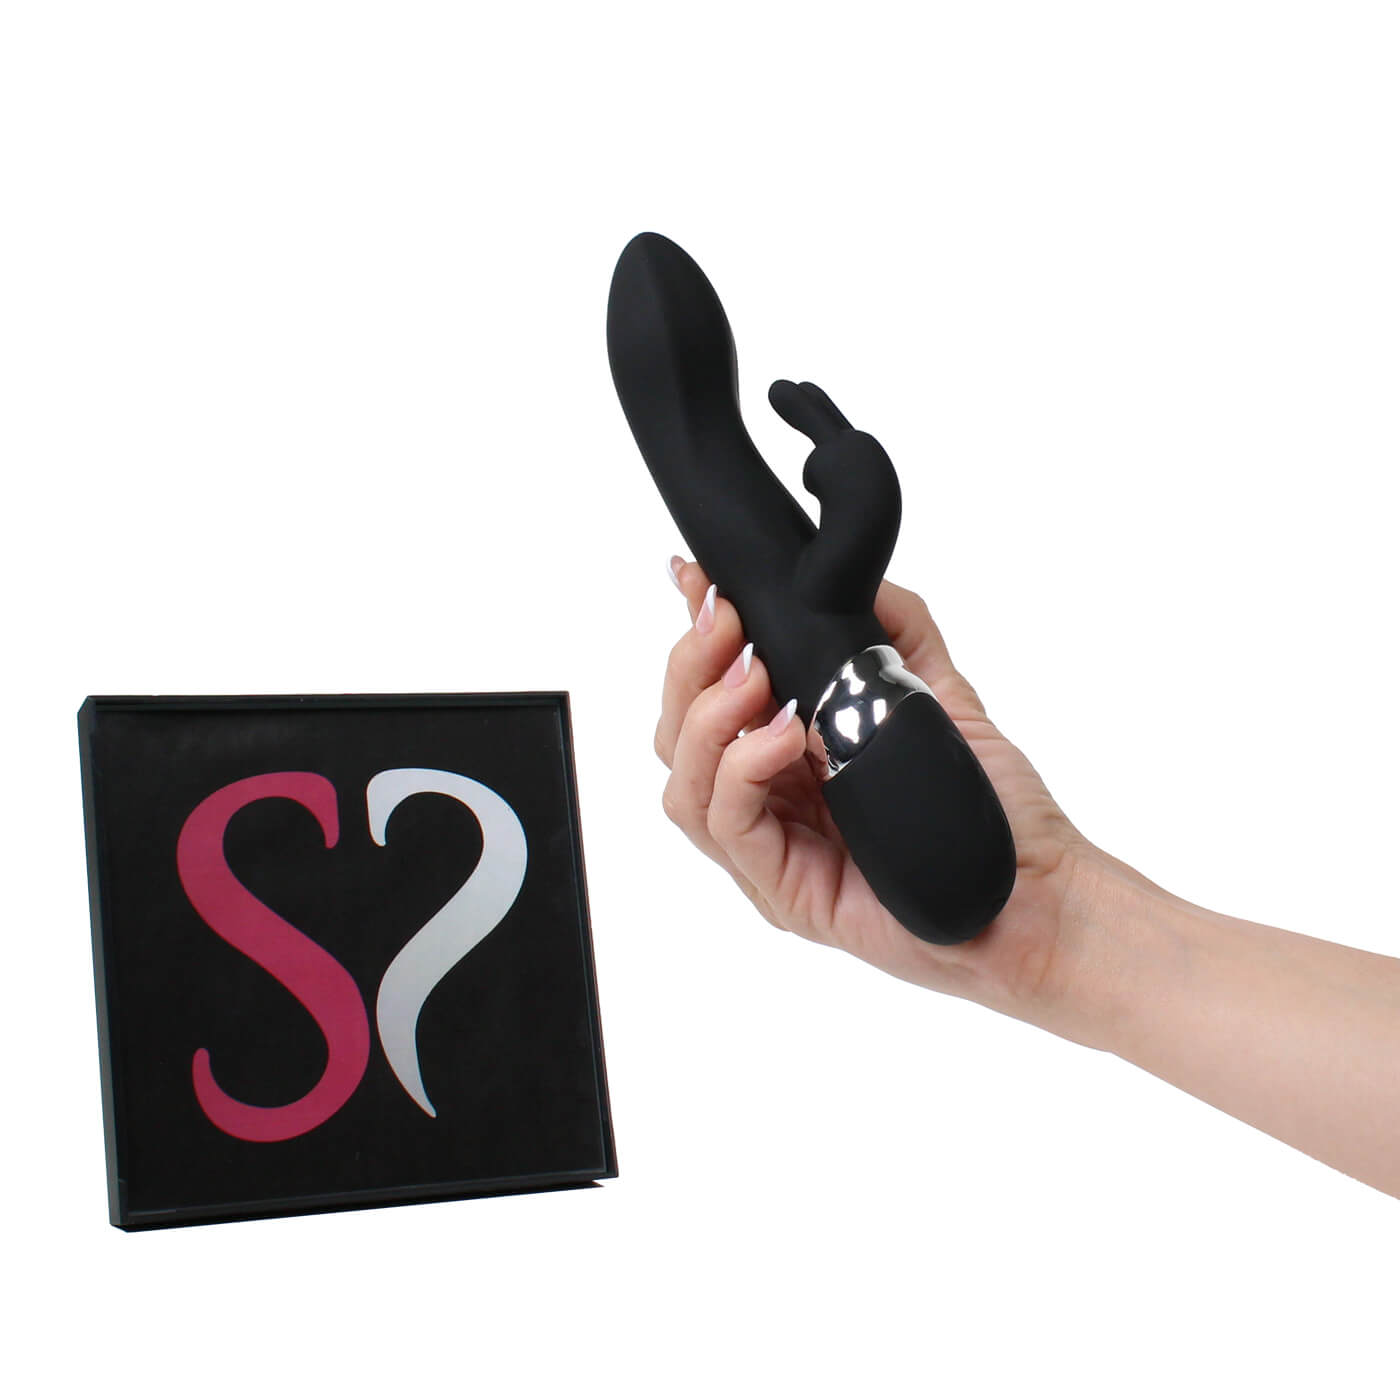 DUALITY 7 Function Pulsating Rechargeable Dual Motor G-Spot Rabbit Vibrator